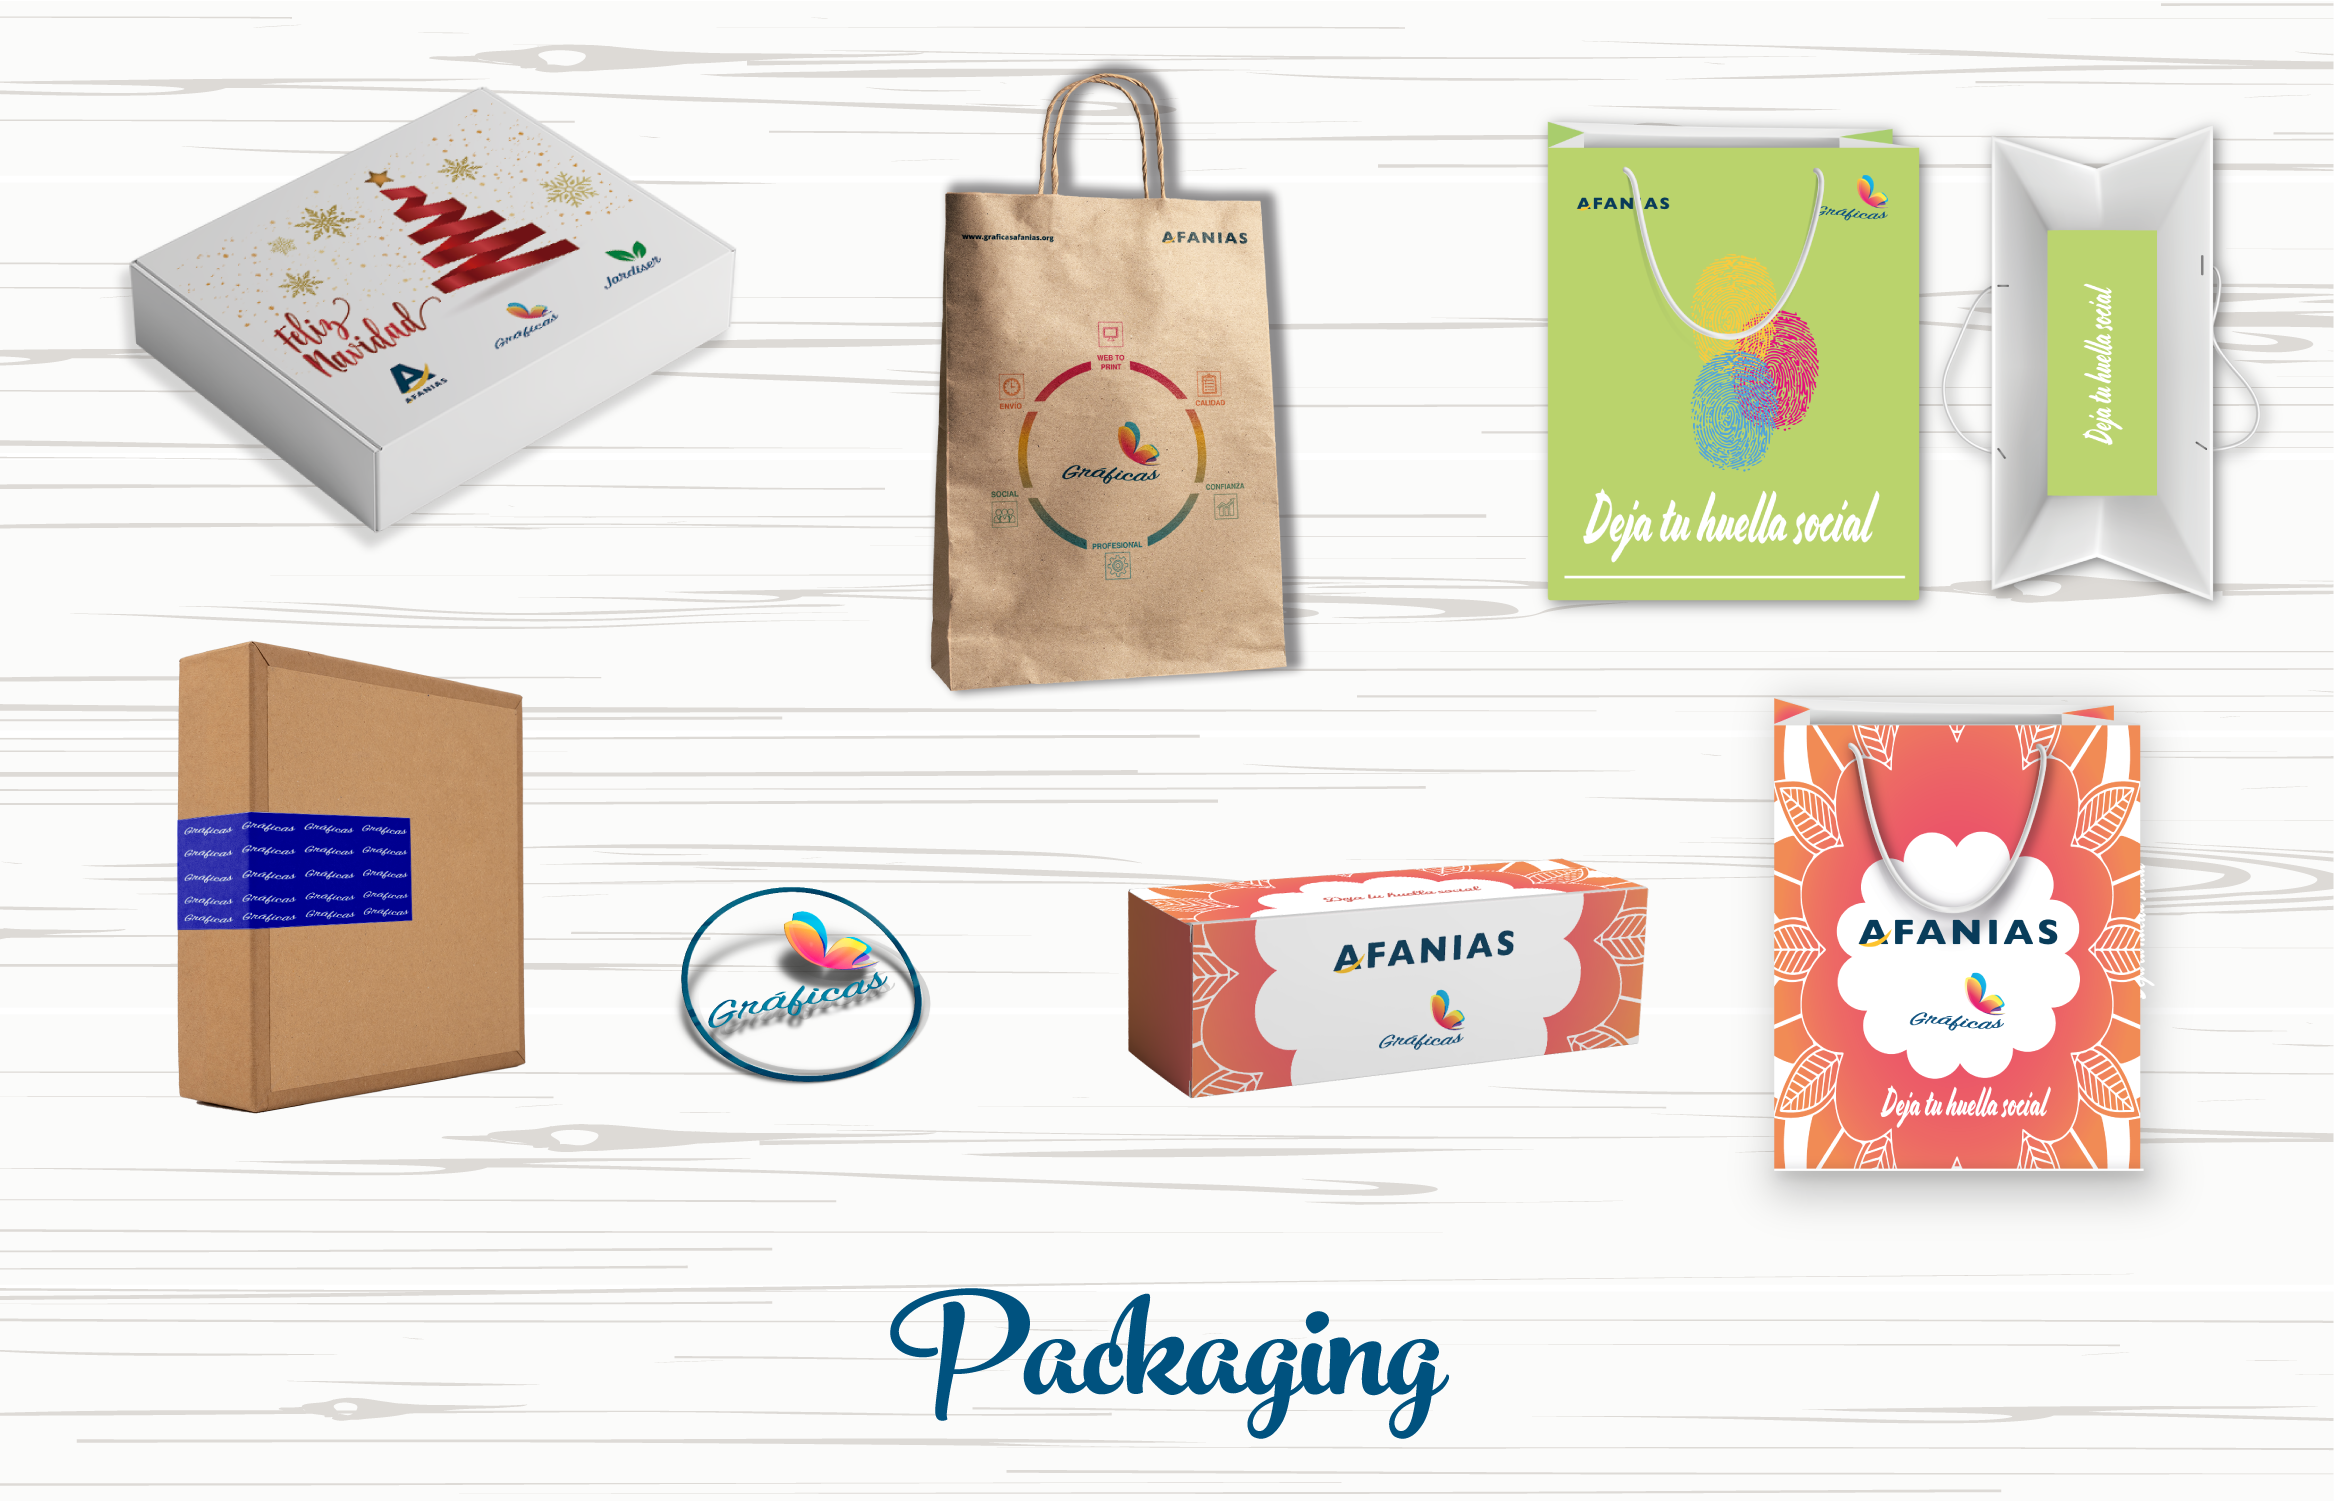 /files/subscribers/c3283b2d-09af-40e1-af49-1c5f2158affc/Webfiles/TIENDA-AFANIAS/PACKAGIN/HOME-PACKAGING.png